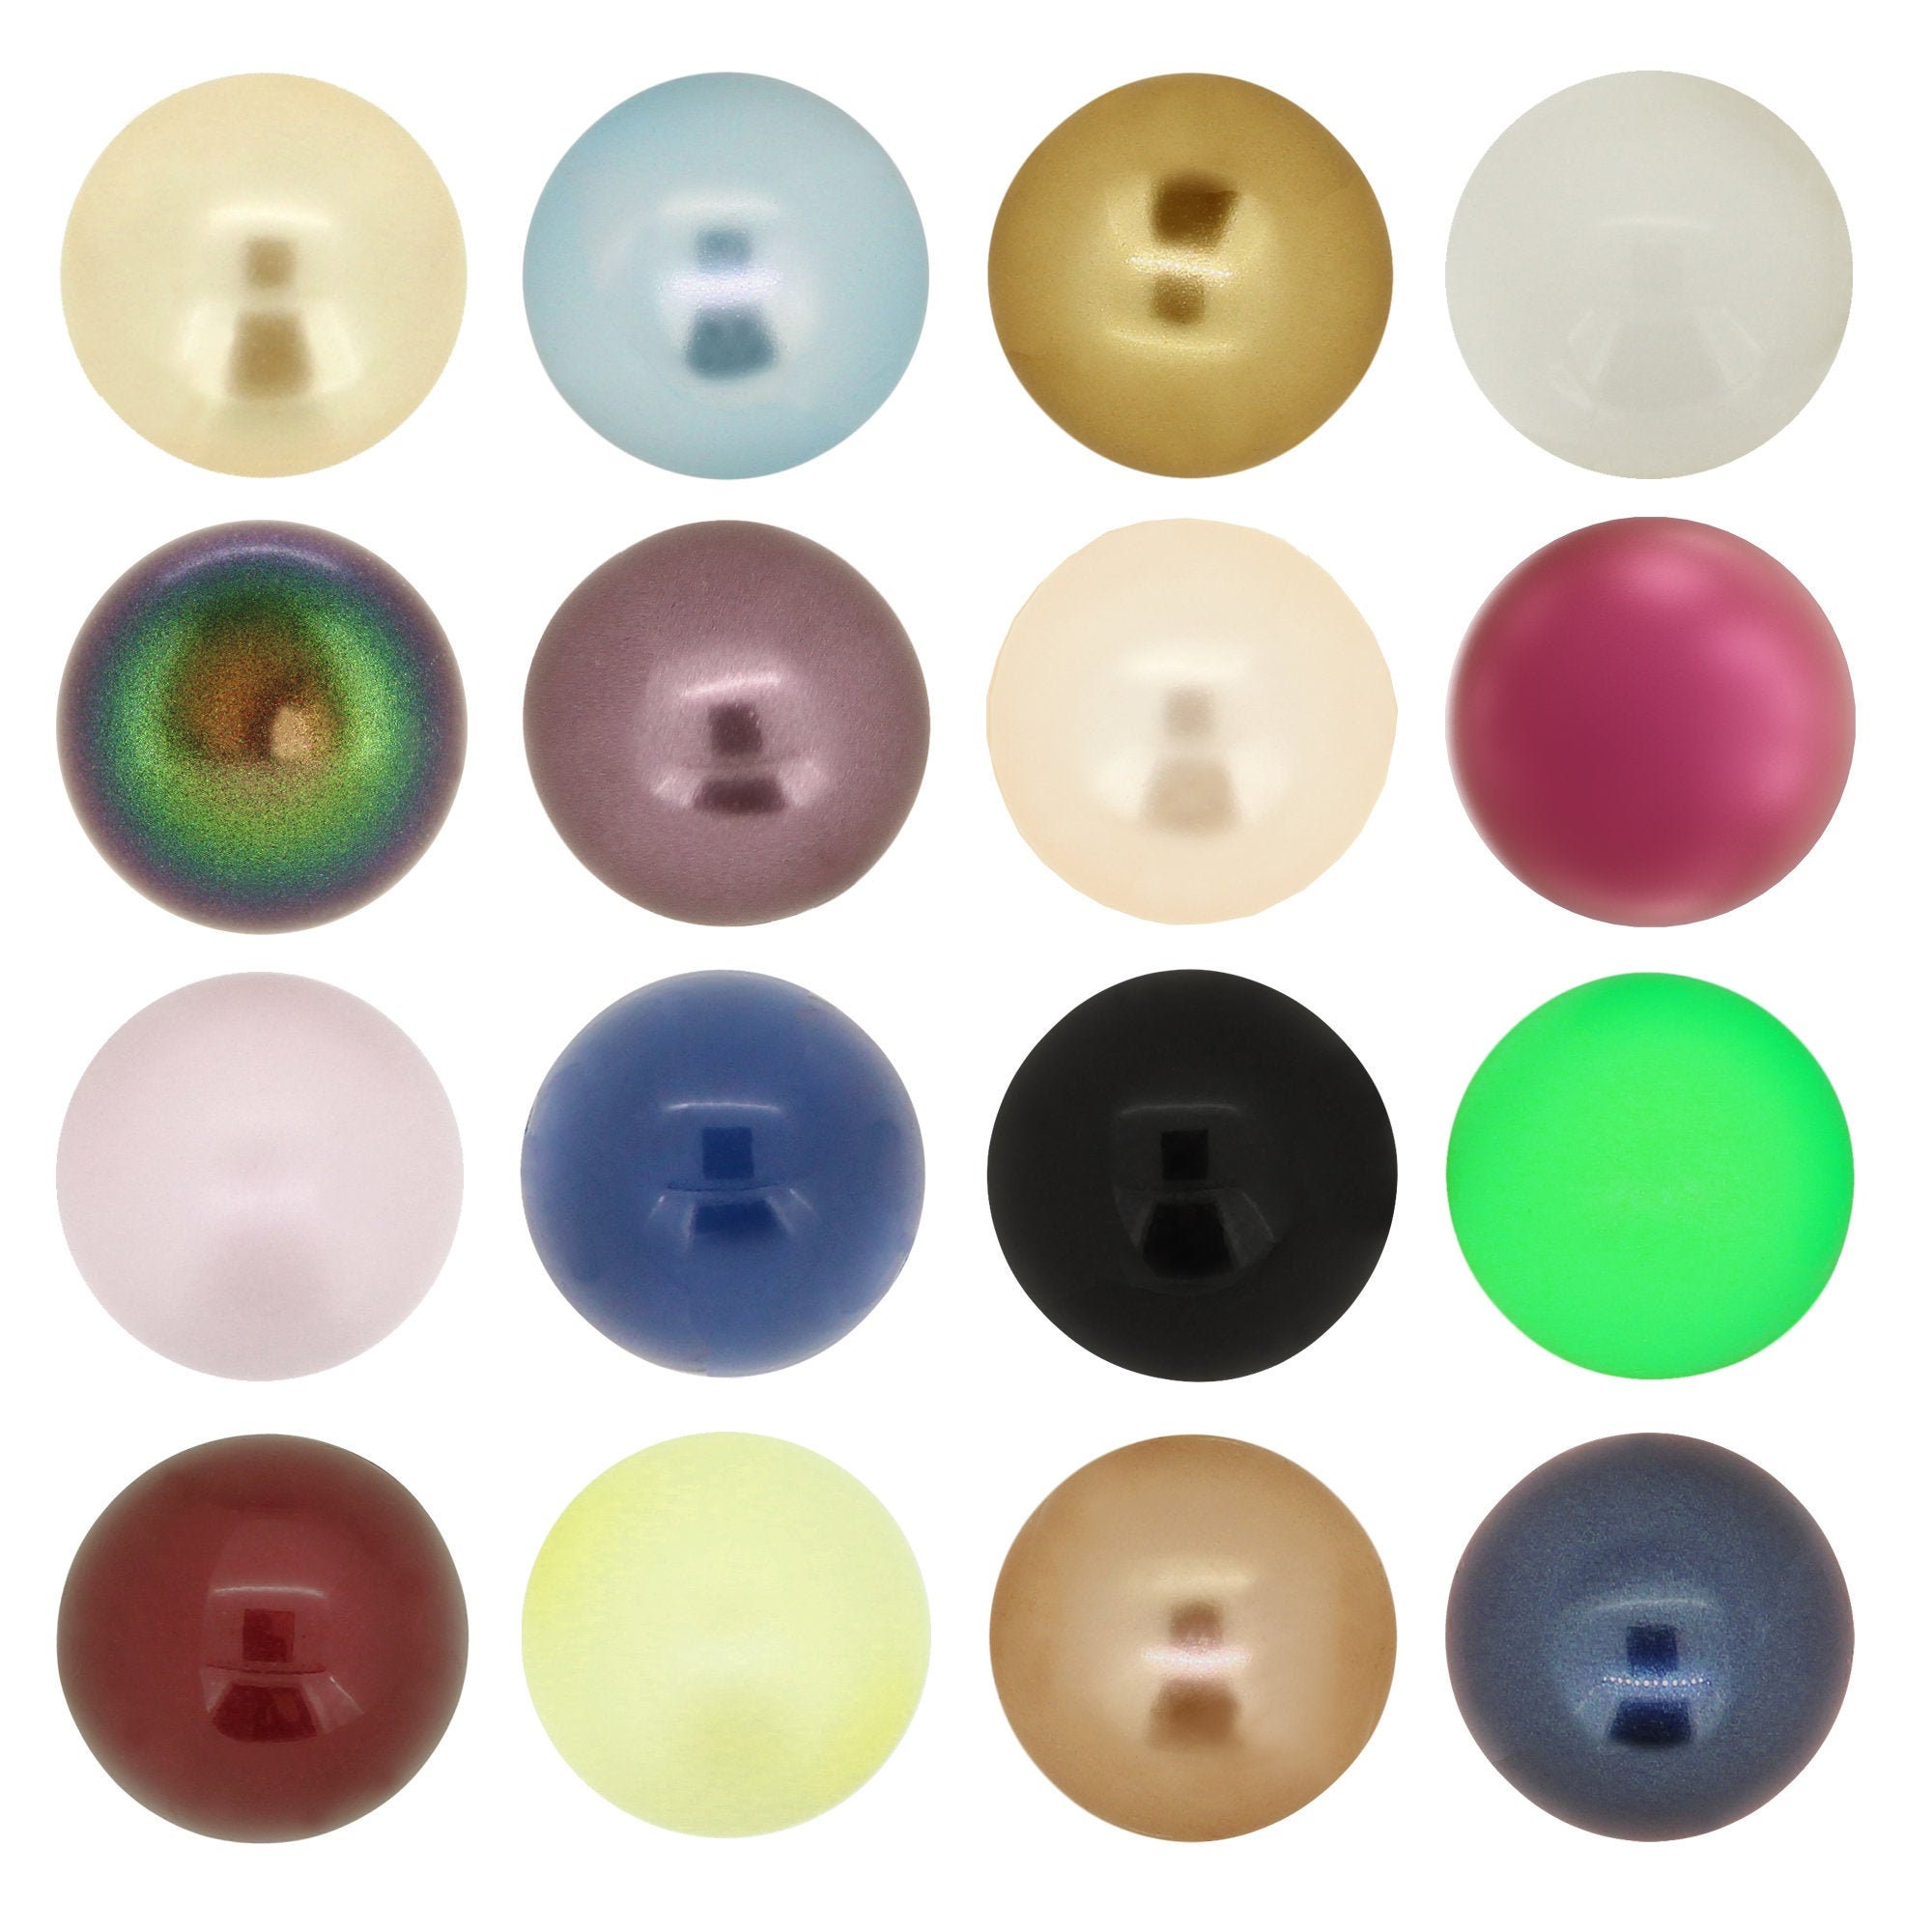 6 pearl effect gems on wires 10mm diameter for cakes bouquets choice of colour 